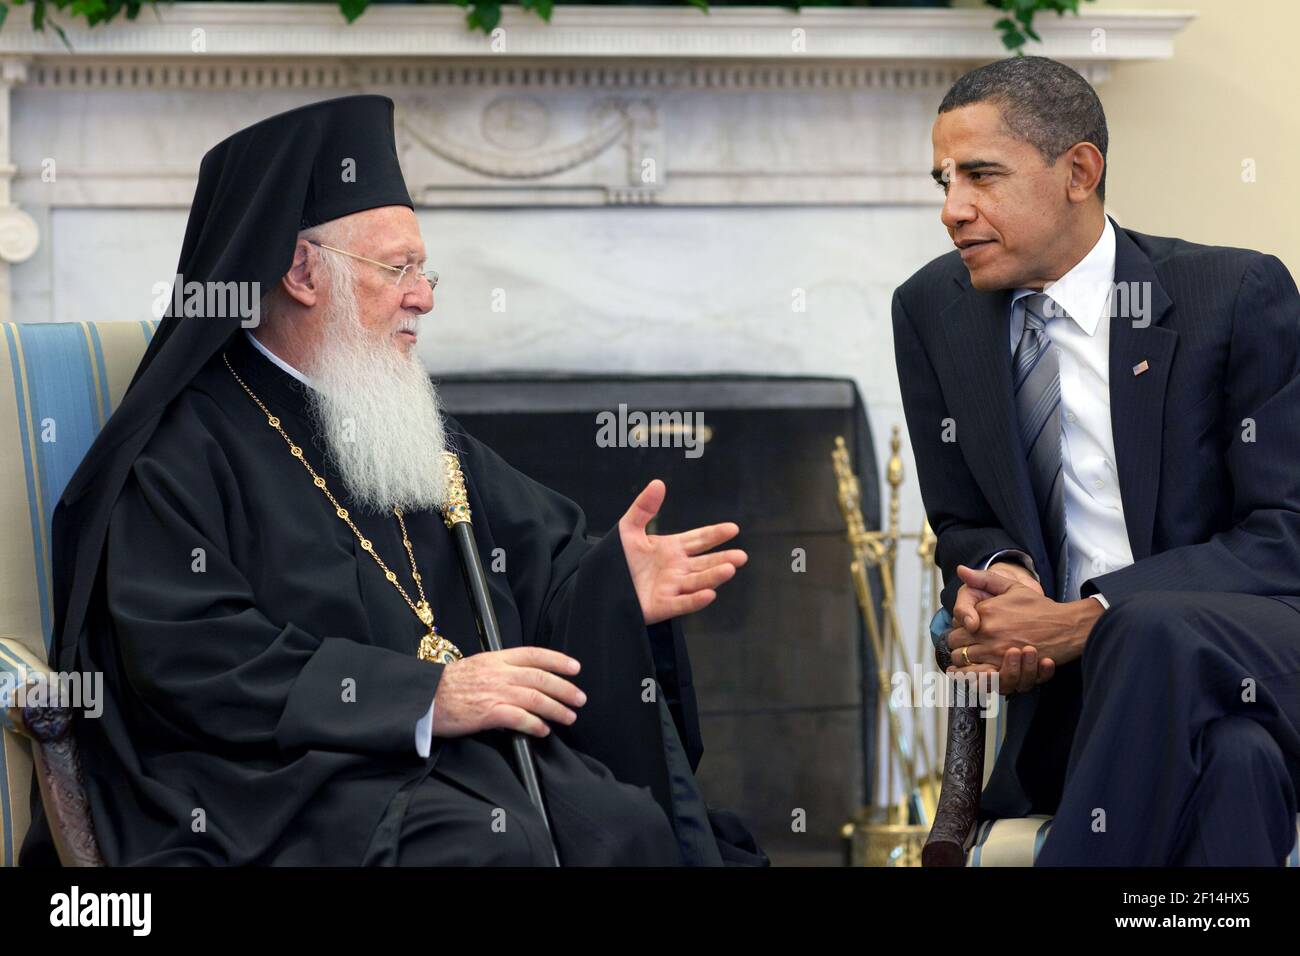 President Barack Obama meets with His All Holiness Ecumenical Patriarch Bartholomew in the Oval Office, Nov. 3, 2009 Stock Photo